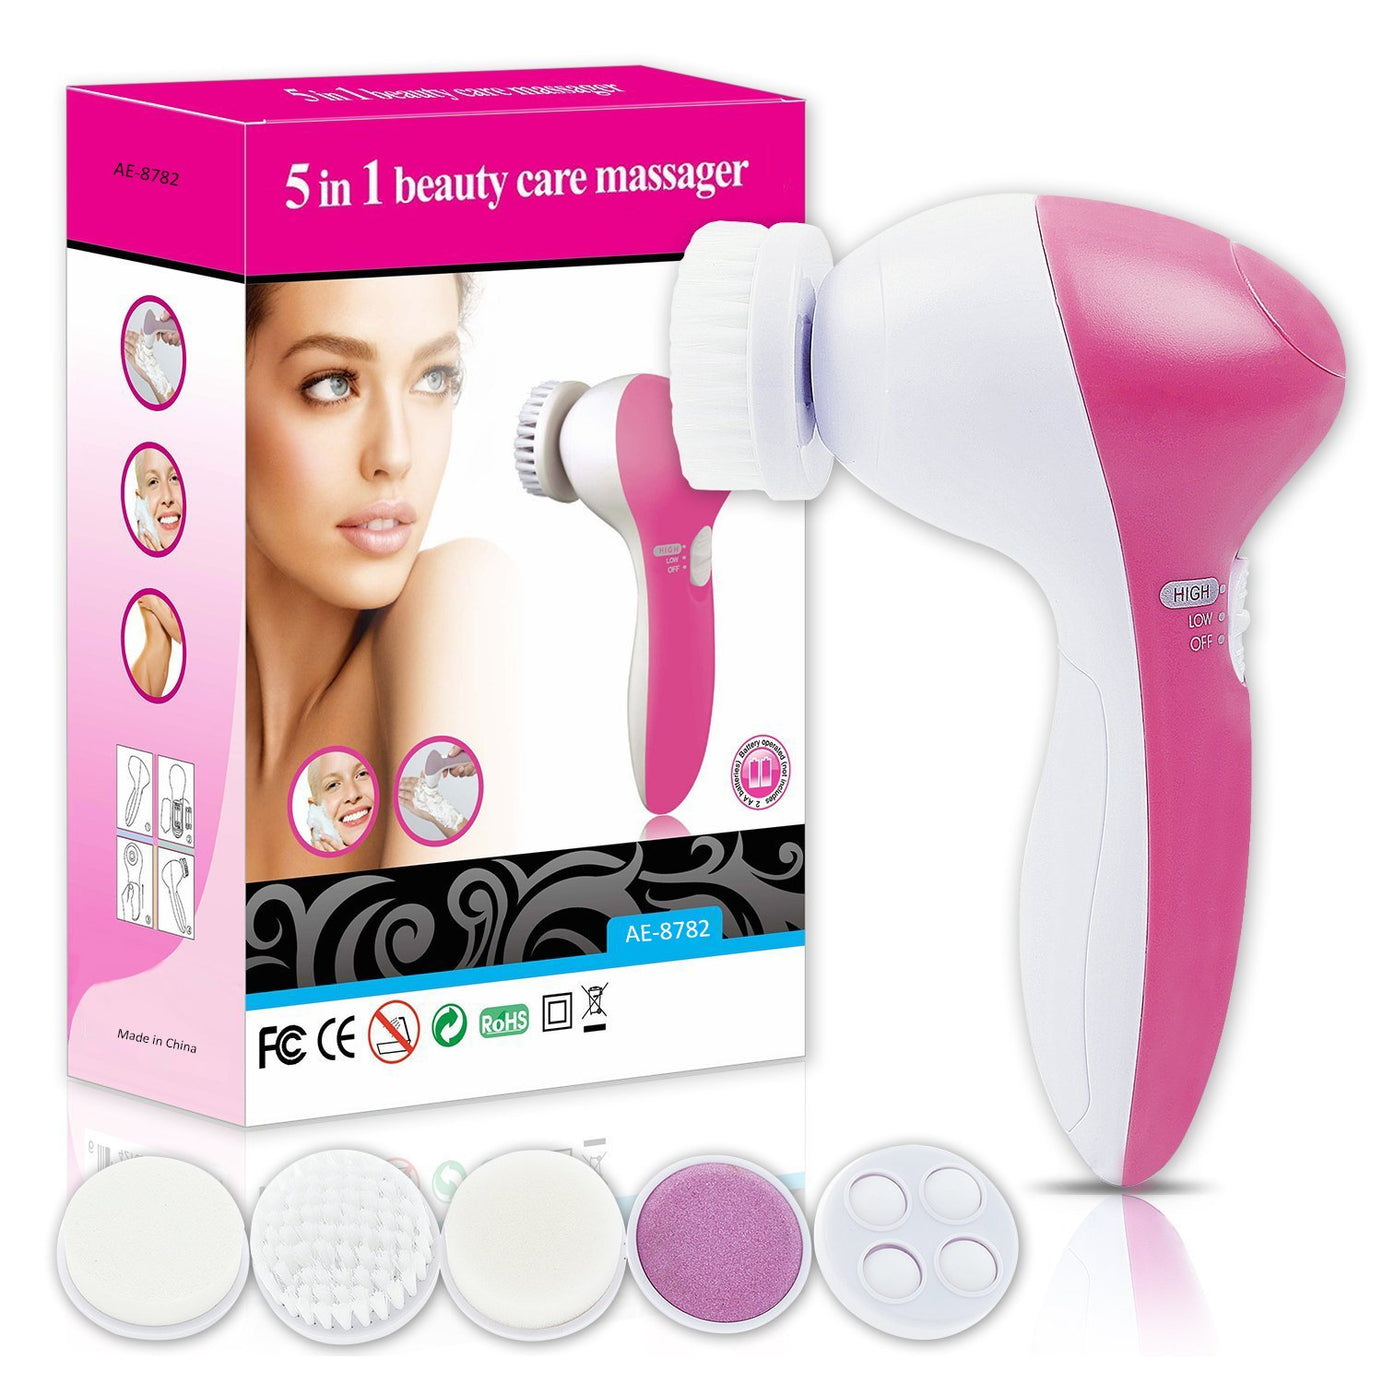 Mega Sale Offer - Imported 5 in 1 Beauty Care Massager Cell Operated Trendy & Luxurious Rs 799